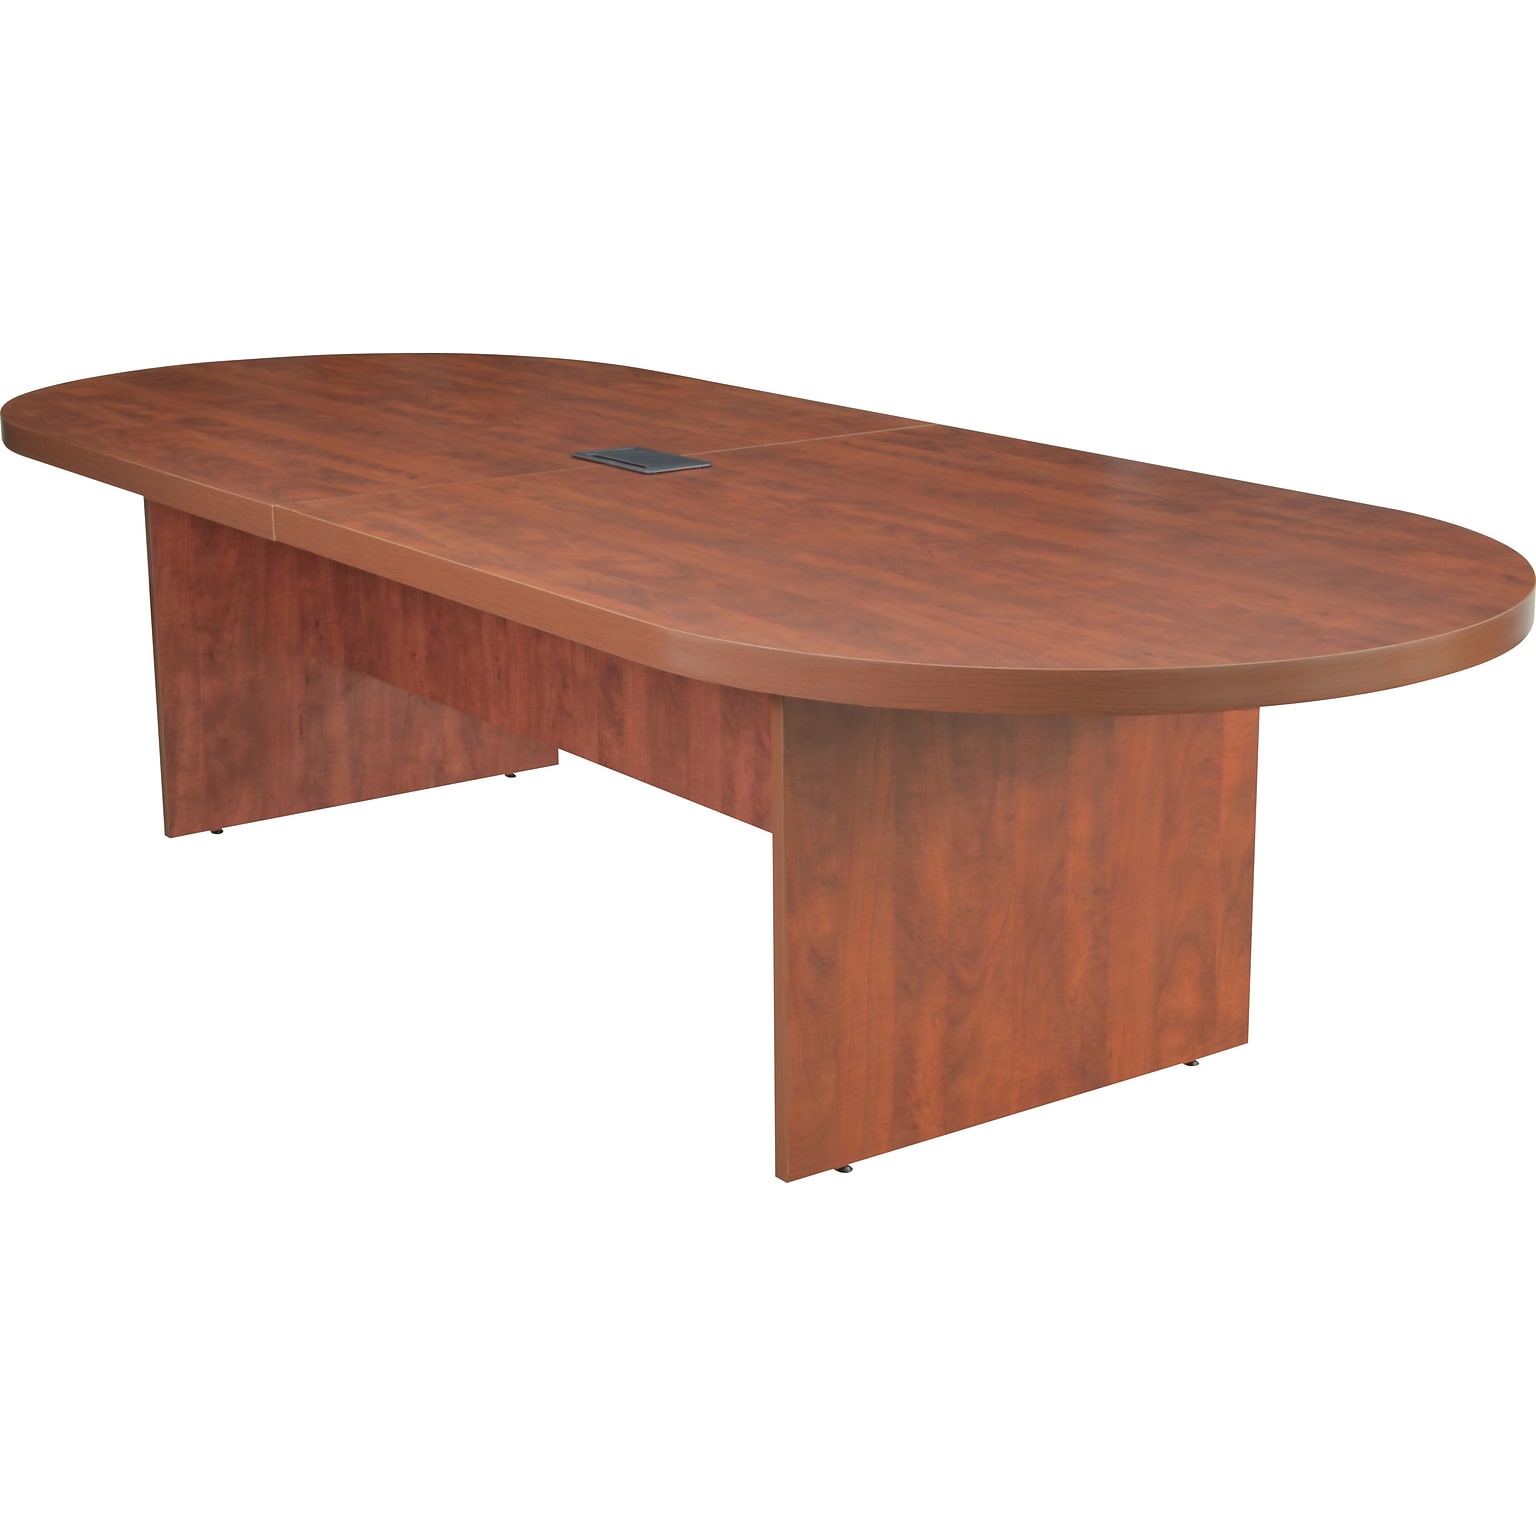 Regency Legacy 120W Racetrack Conference Table, Cherry (LCTRT12047CH)